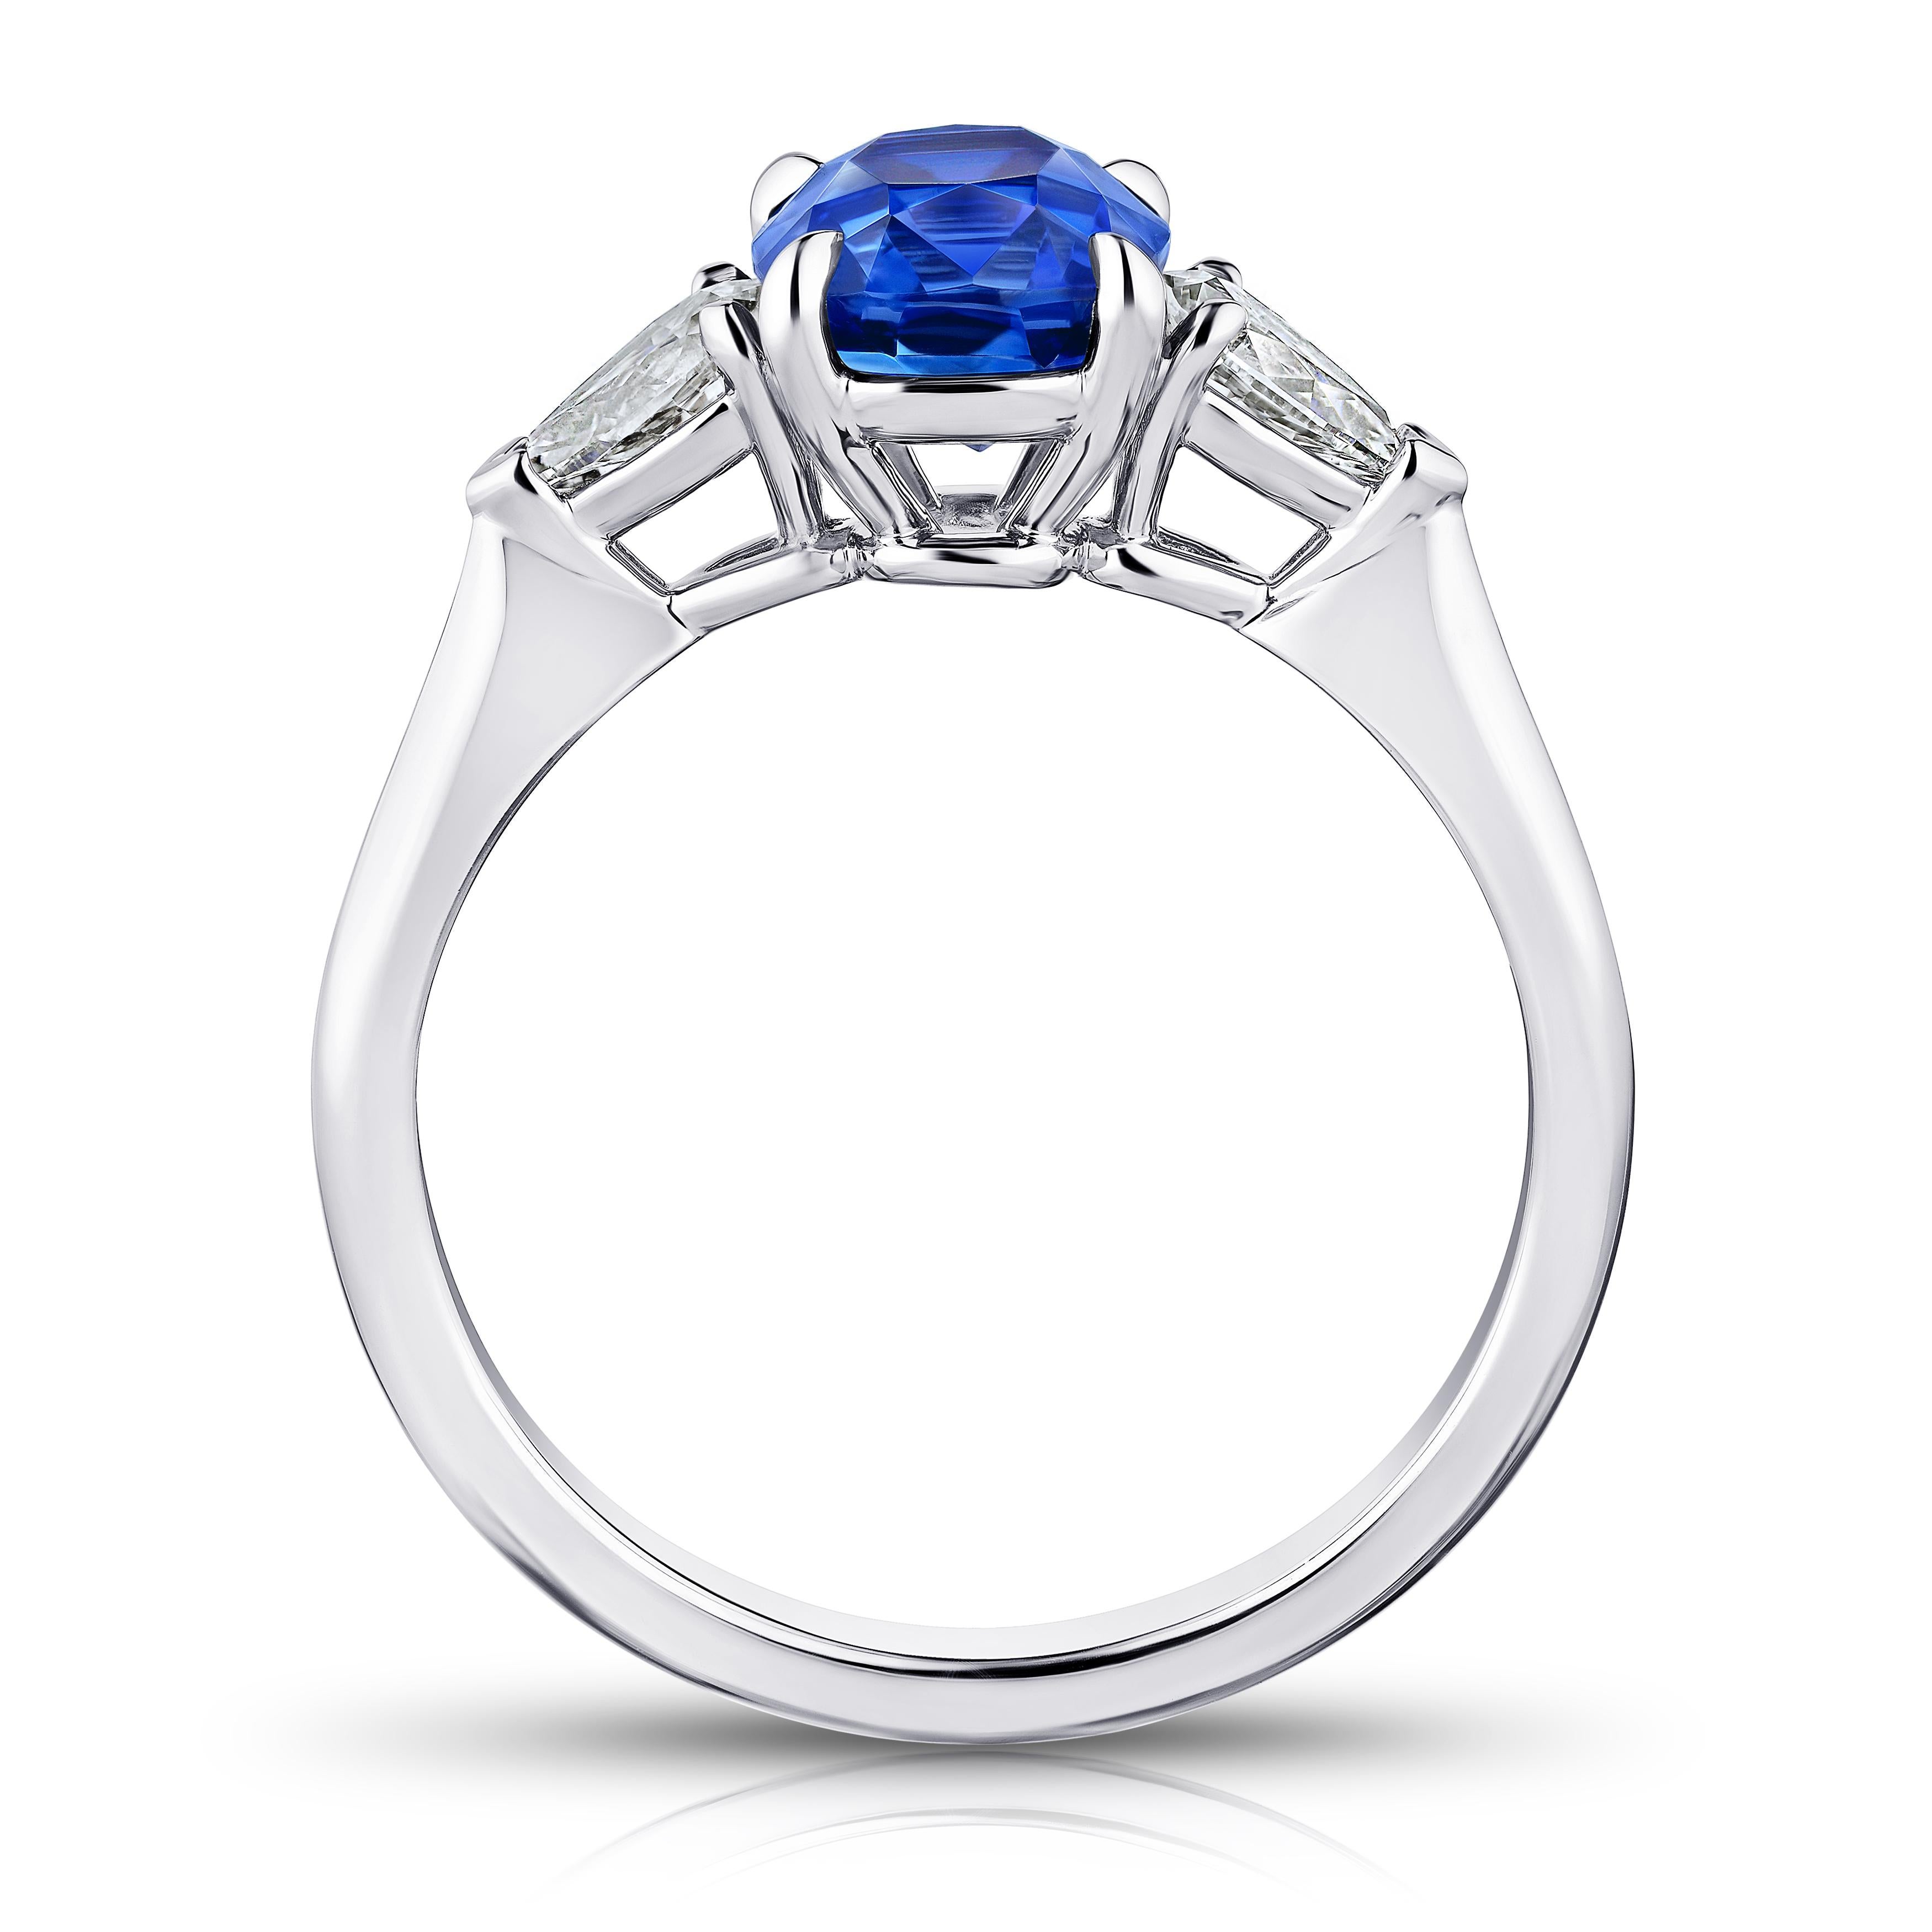 2.11 Carat Cushion Blue Sapphire and Diamond Ring For Sale at 1stDibs